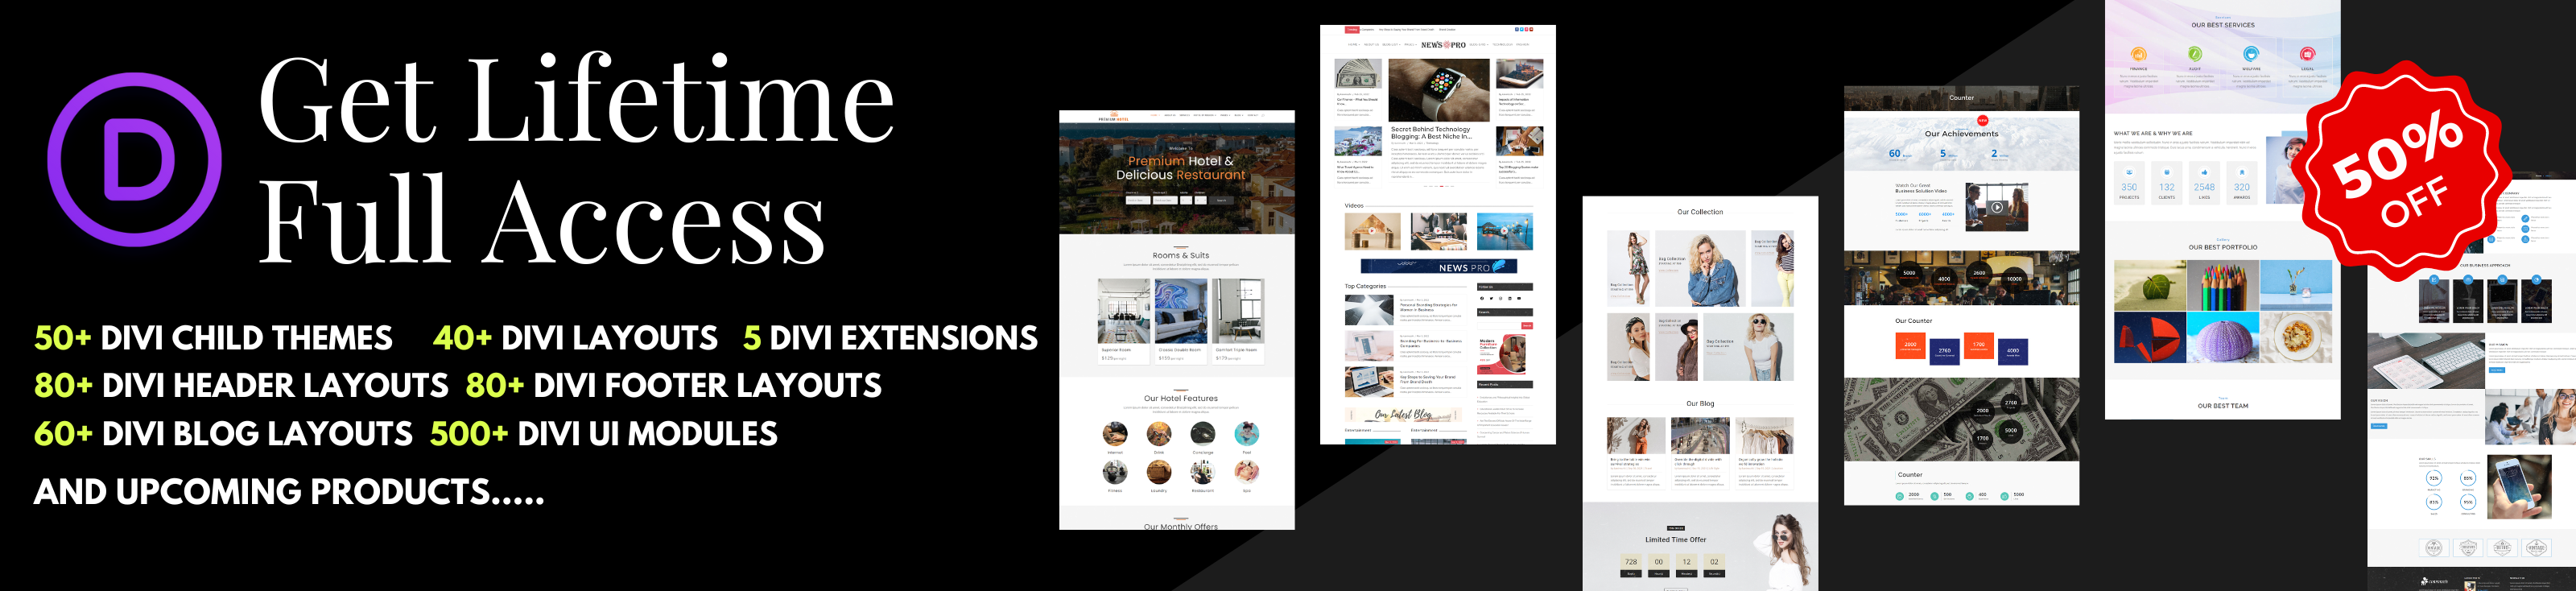 iTrip - Responsive Email Template